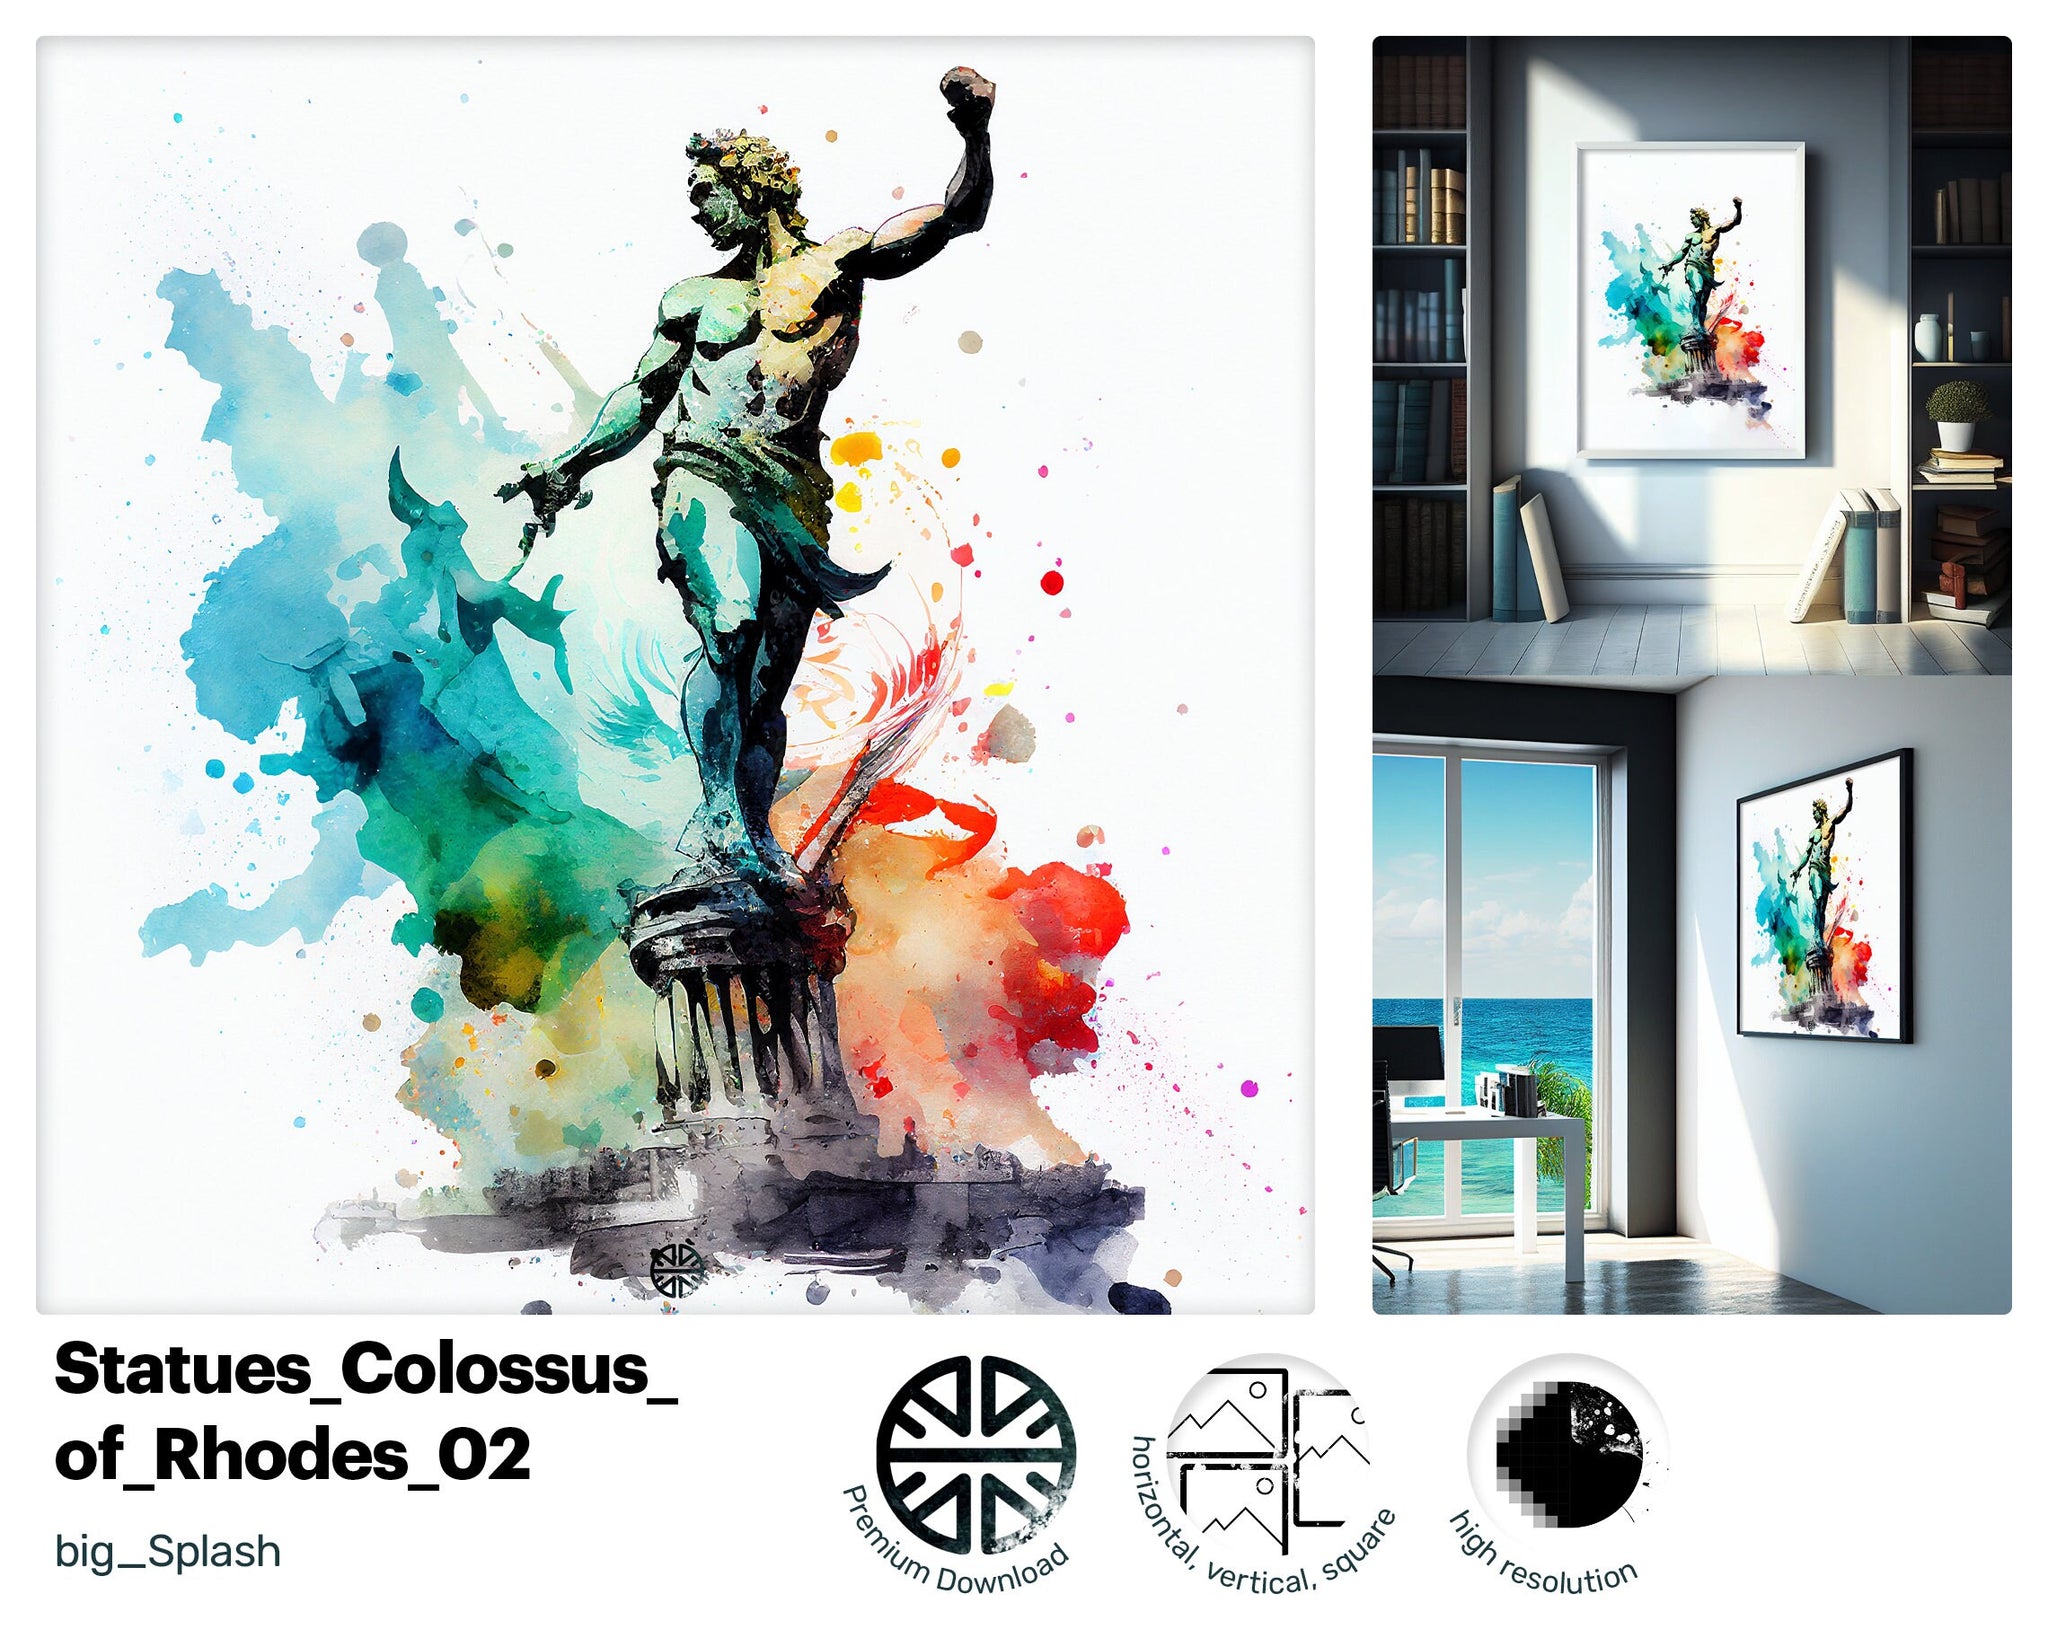 Swift Magical Colossus of Rhodes, Jolly Bright JPG, Fun Delightful Glamorous Quirky Kind Art Piece